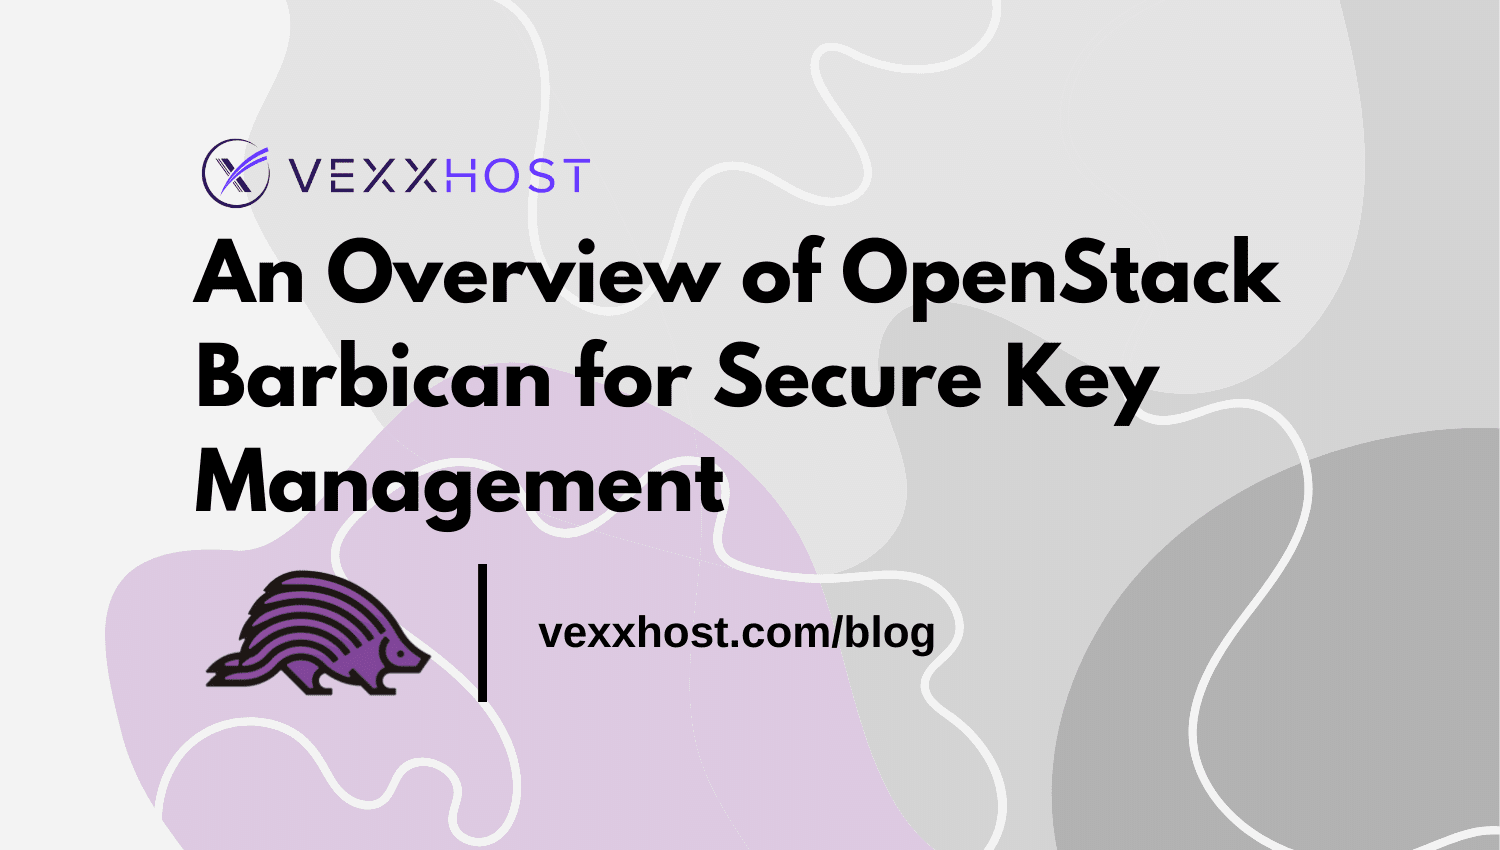 An Overview of OpenStack Barbican for Secure Key Management